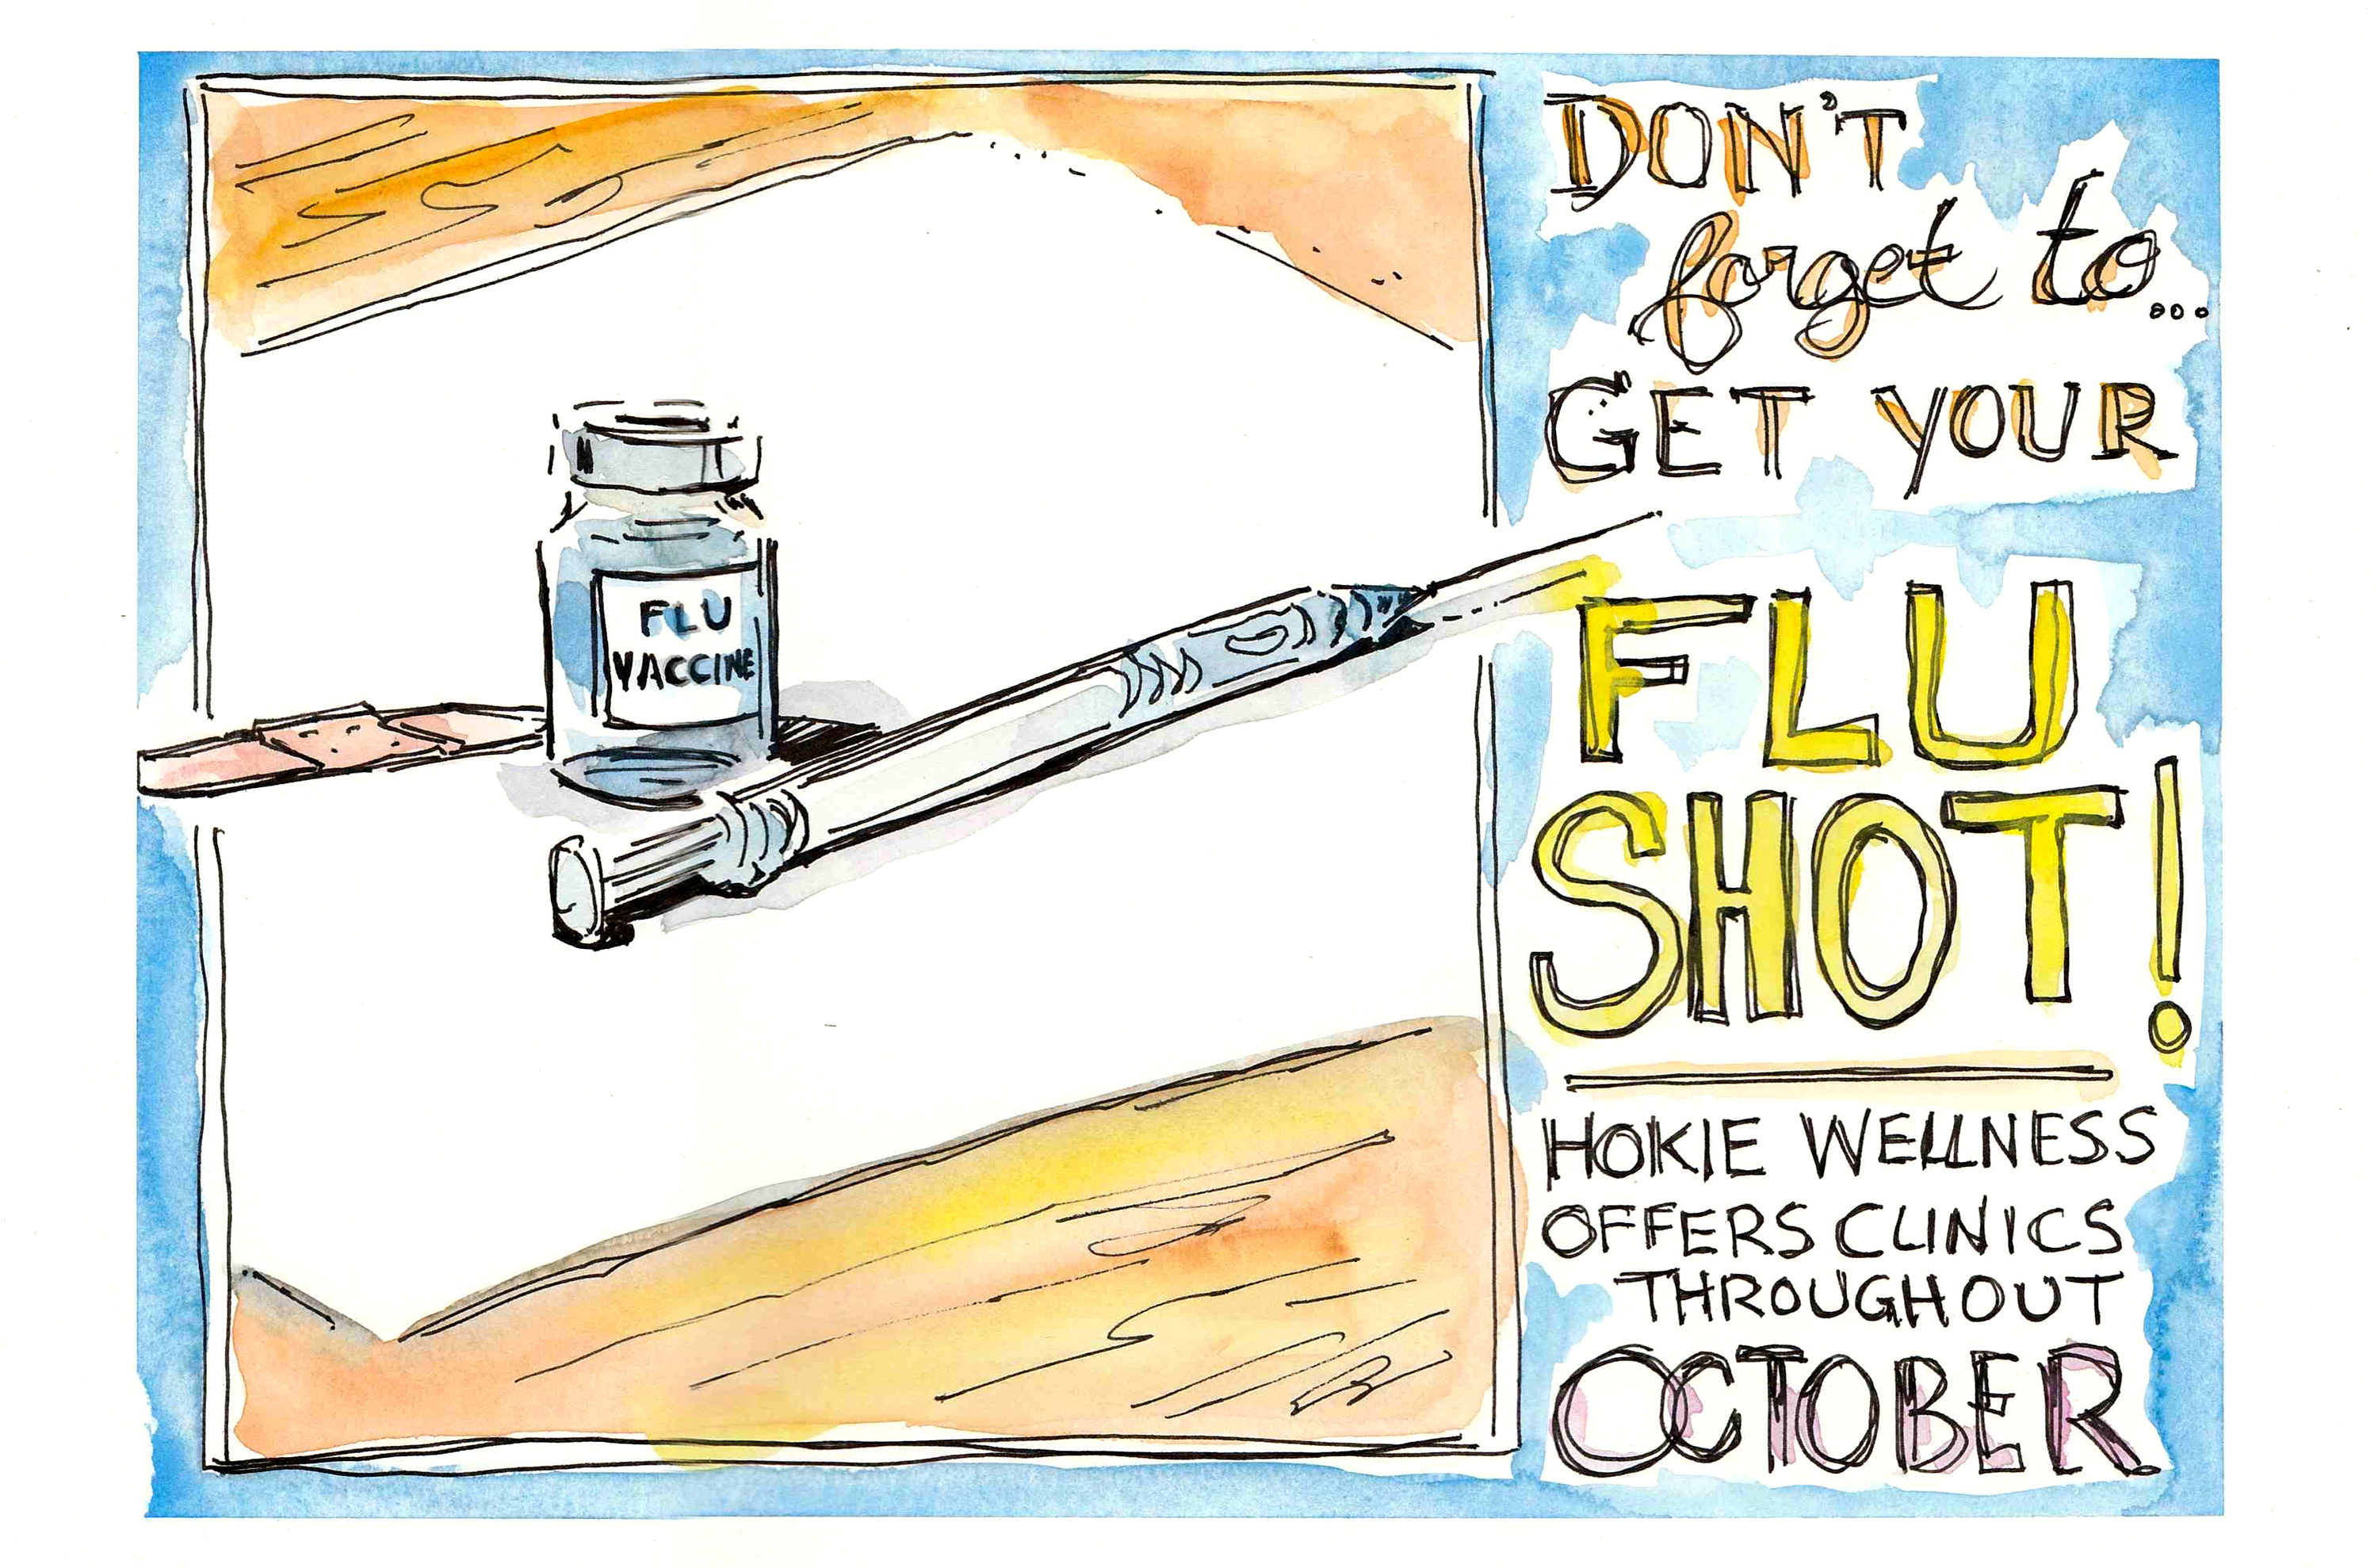 Don't Forget Your Flu Shot -- Appeared Oct. 5, 2020